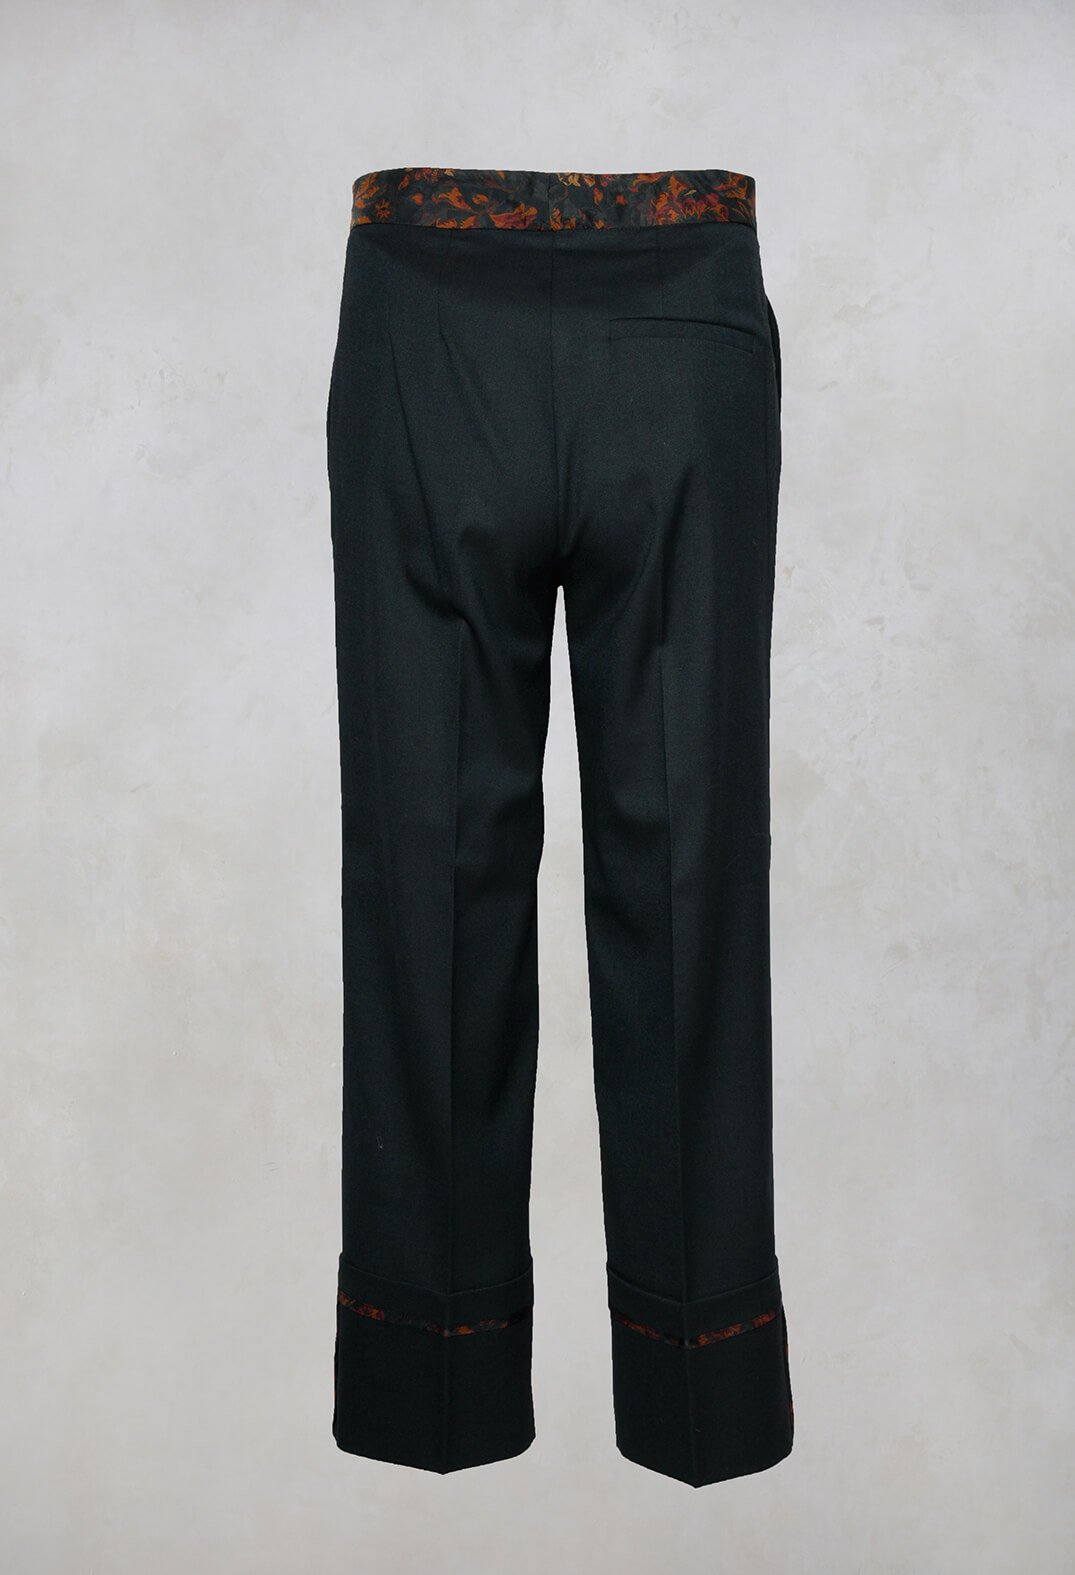 dark green tailored trousers with floral trim detail